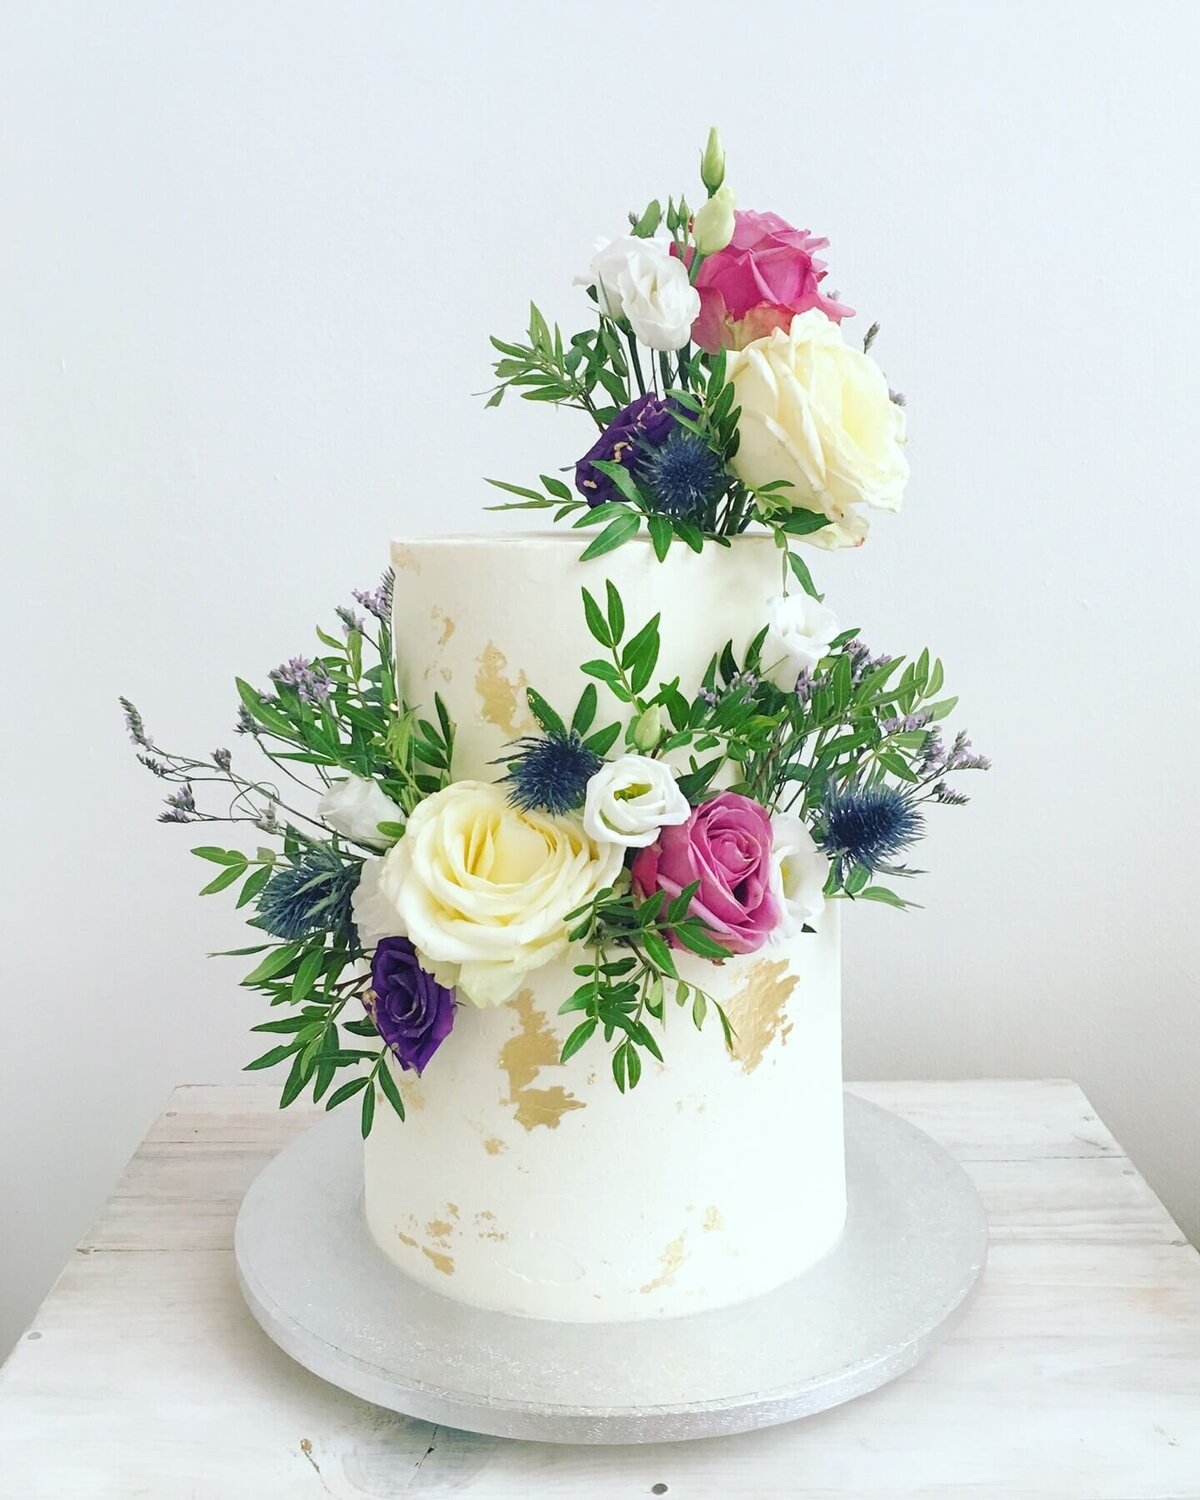 An elegant 2 tier wedding cake with flowers and specs of gold